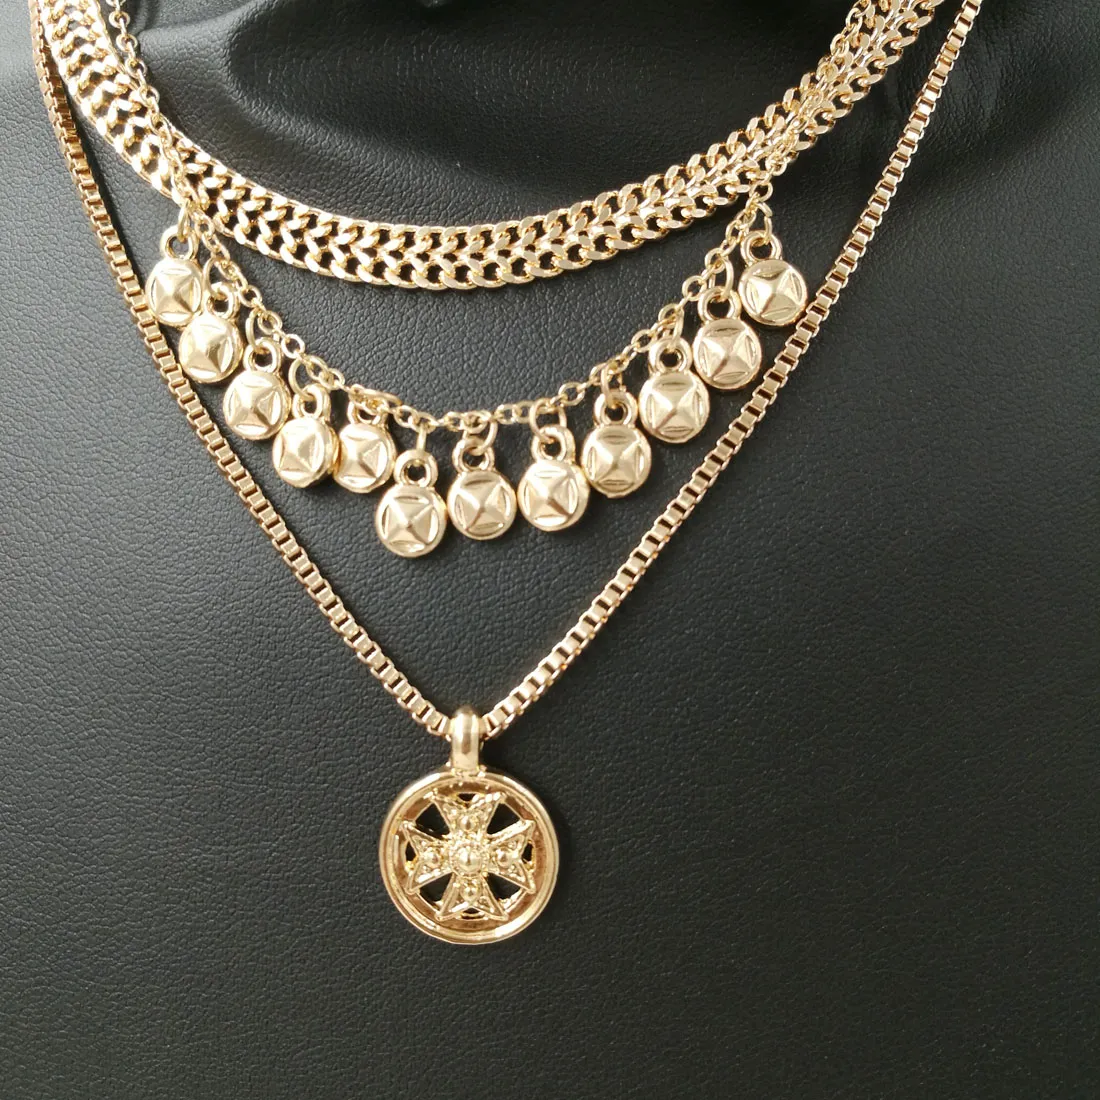 Fashion Brand Punk Metal chain coin chokers necklaces for Women Vintage jewelry Gold Cross Pendants Necklaces chunky necklace